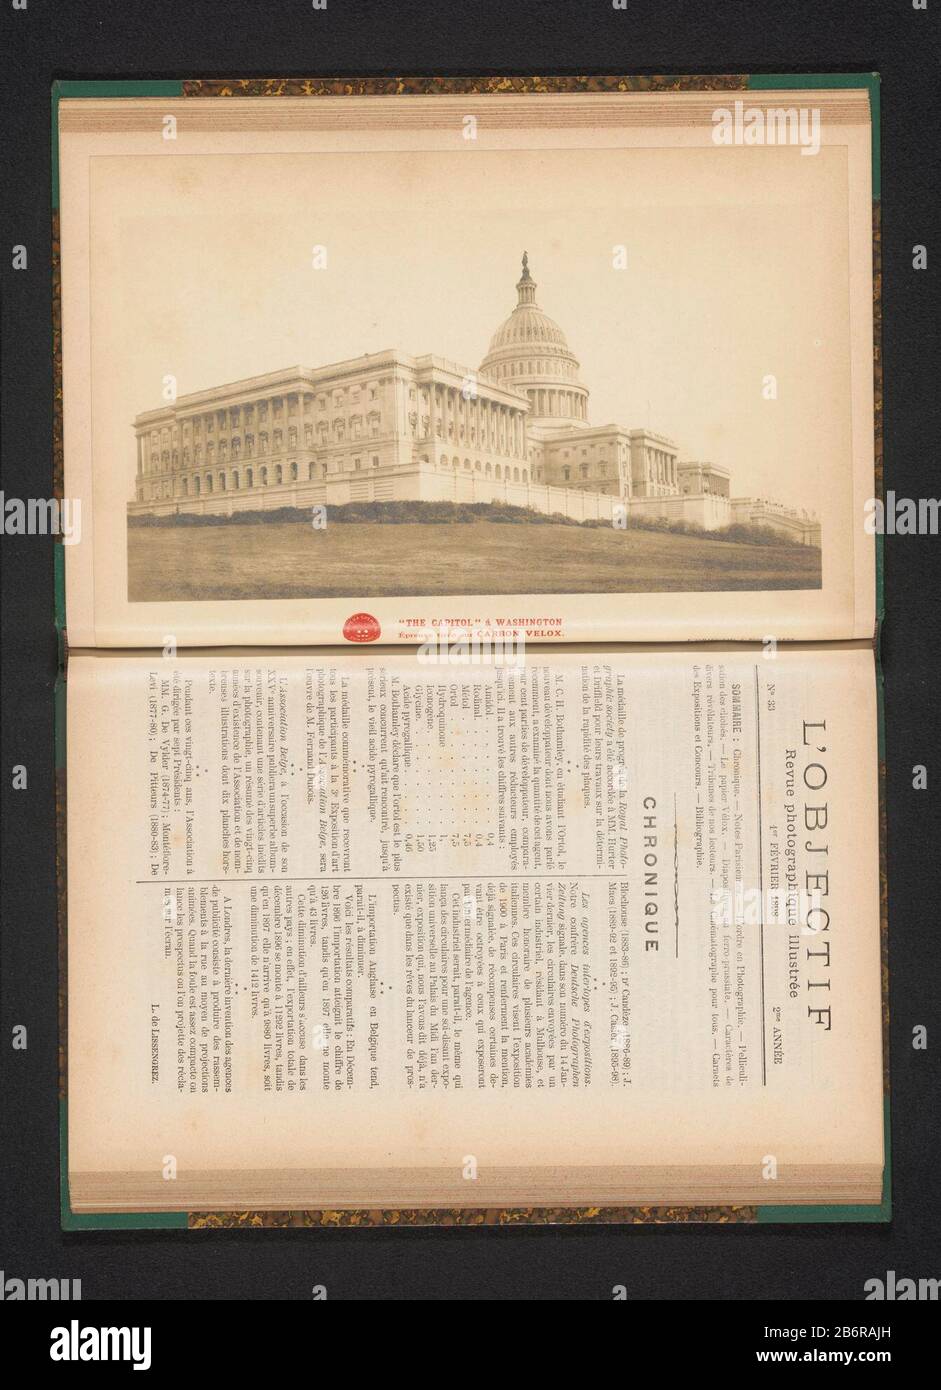 View Of The Capitol In Washington Dcthe Capitol A Washington Title Object Property Type Photo Page Item Number Rp F 01 7 1287 9 Inscriptions Brands Inscription Recto Printed Epreuve Tiree Sur Carbon Velox Firmanaam